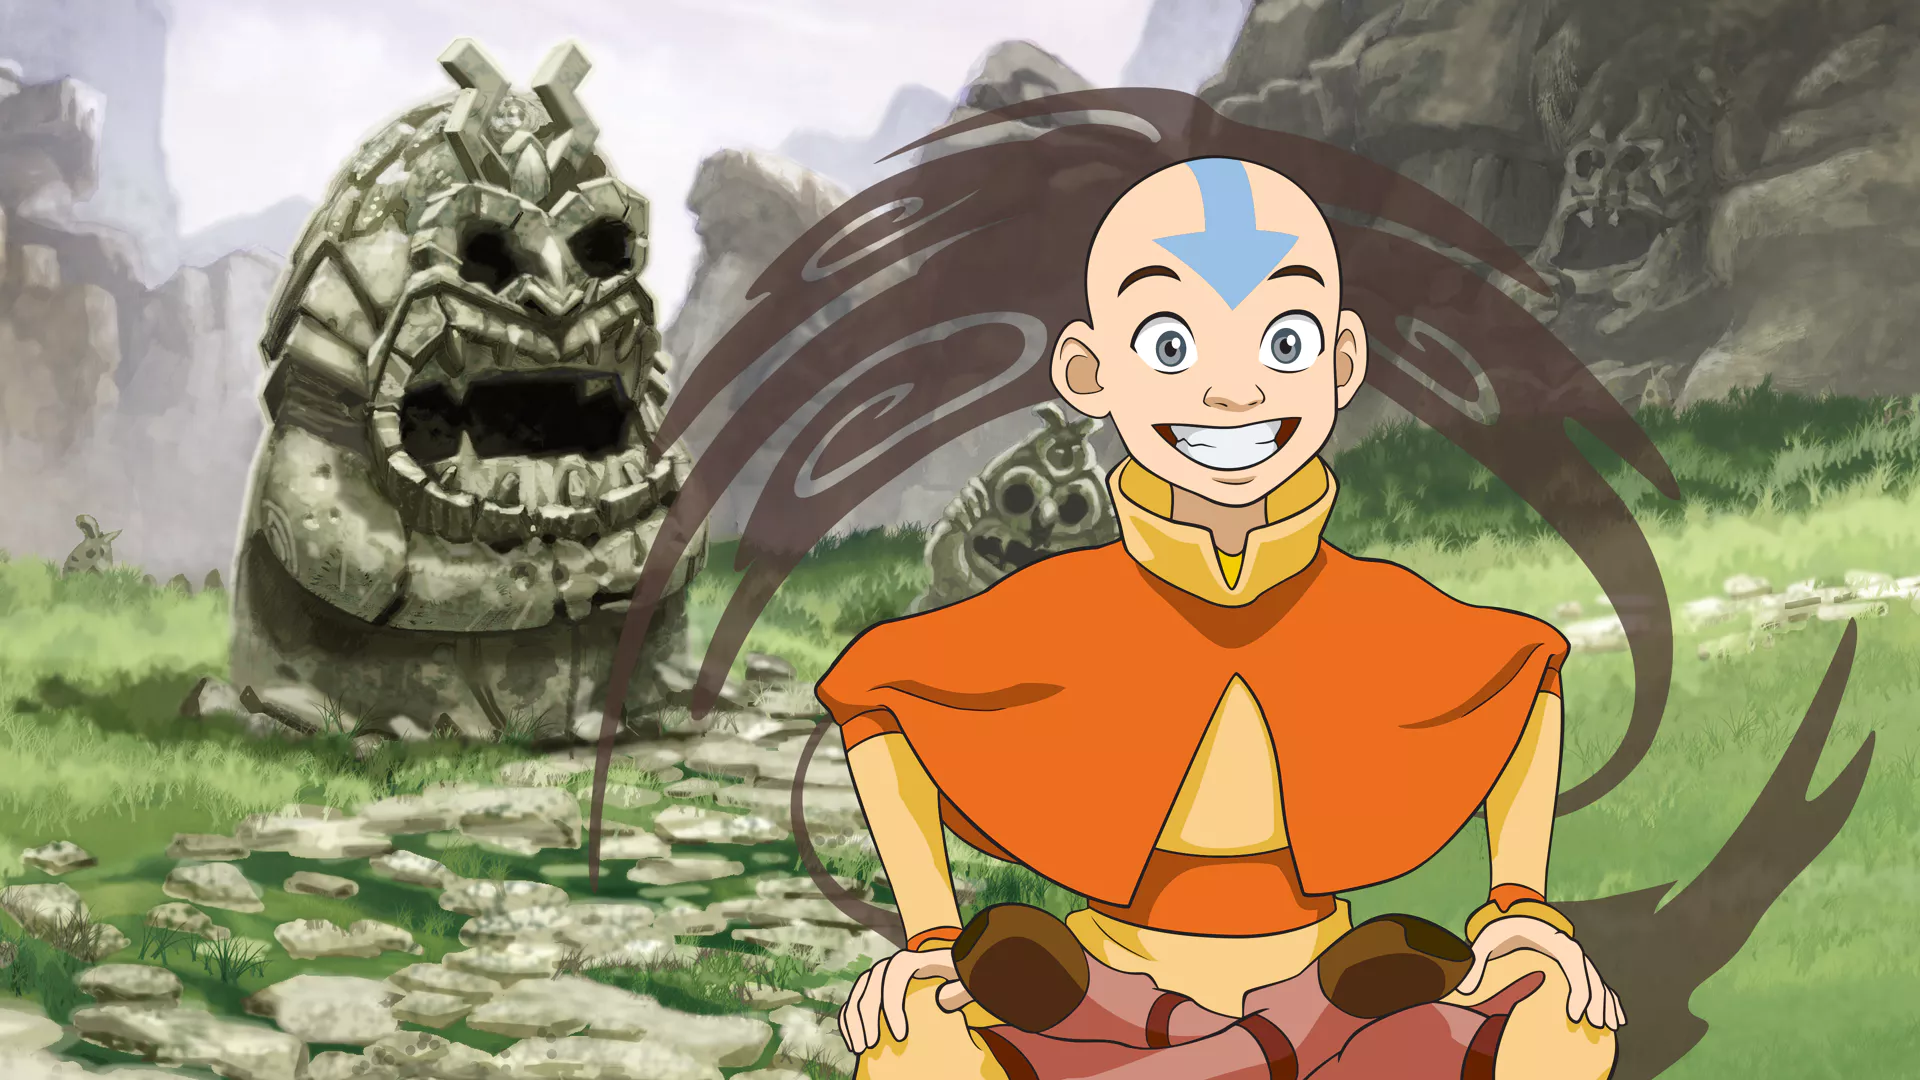 Aang, a young bald boy with blue tattoos and airbending clothes of orange and blue, sits meditatively on the head of a giant stone statue. The statue depicts a figure with a stern expression, adorned with elaborate headwear.